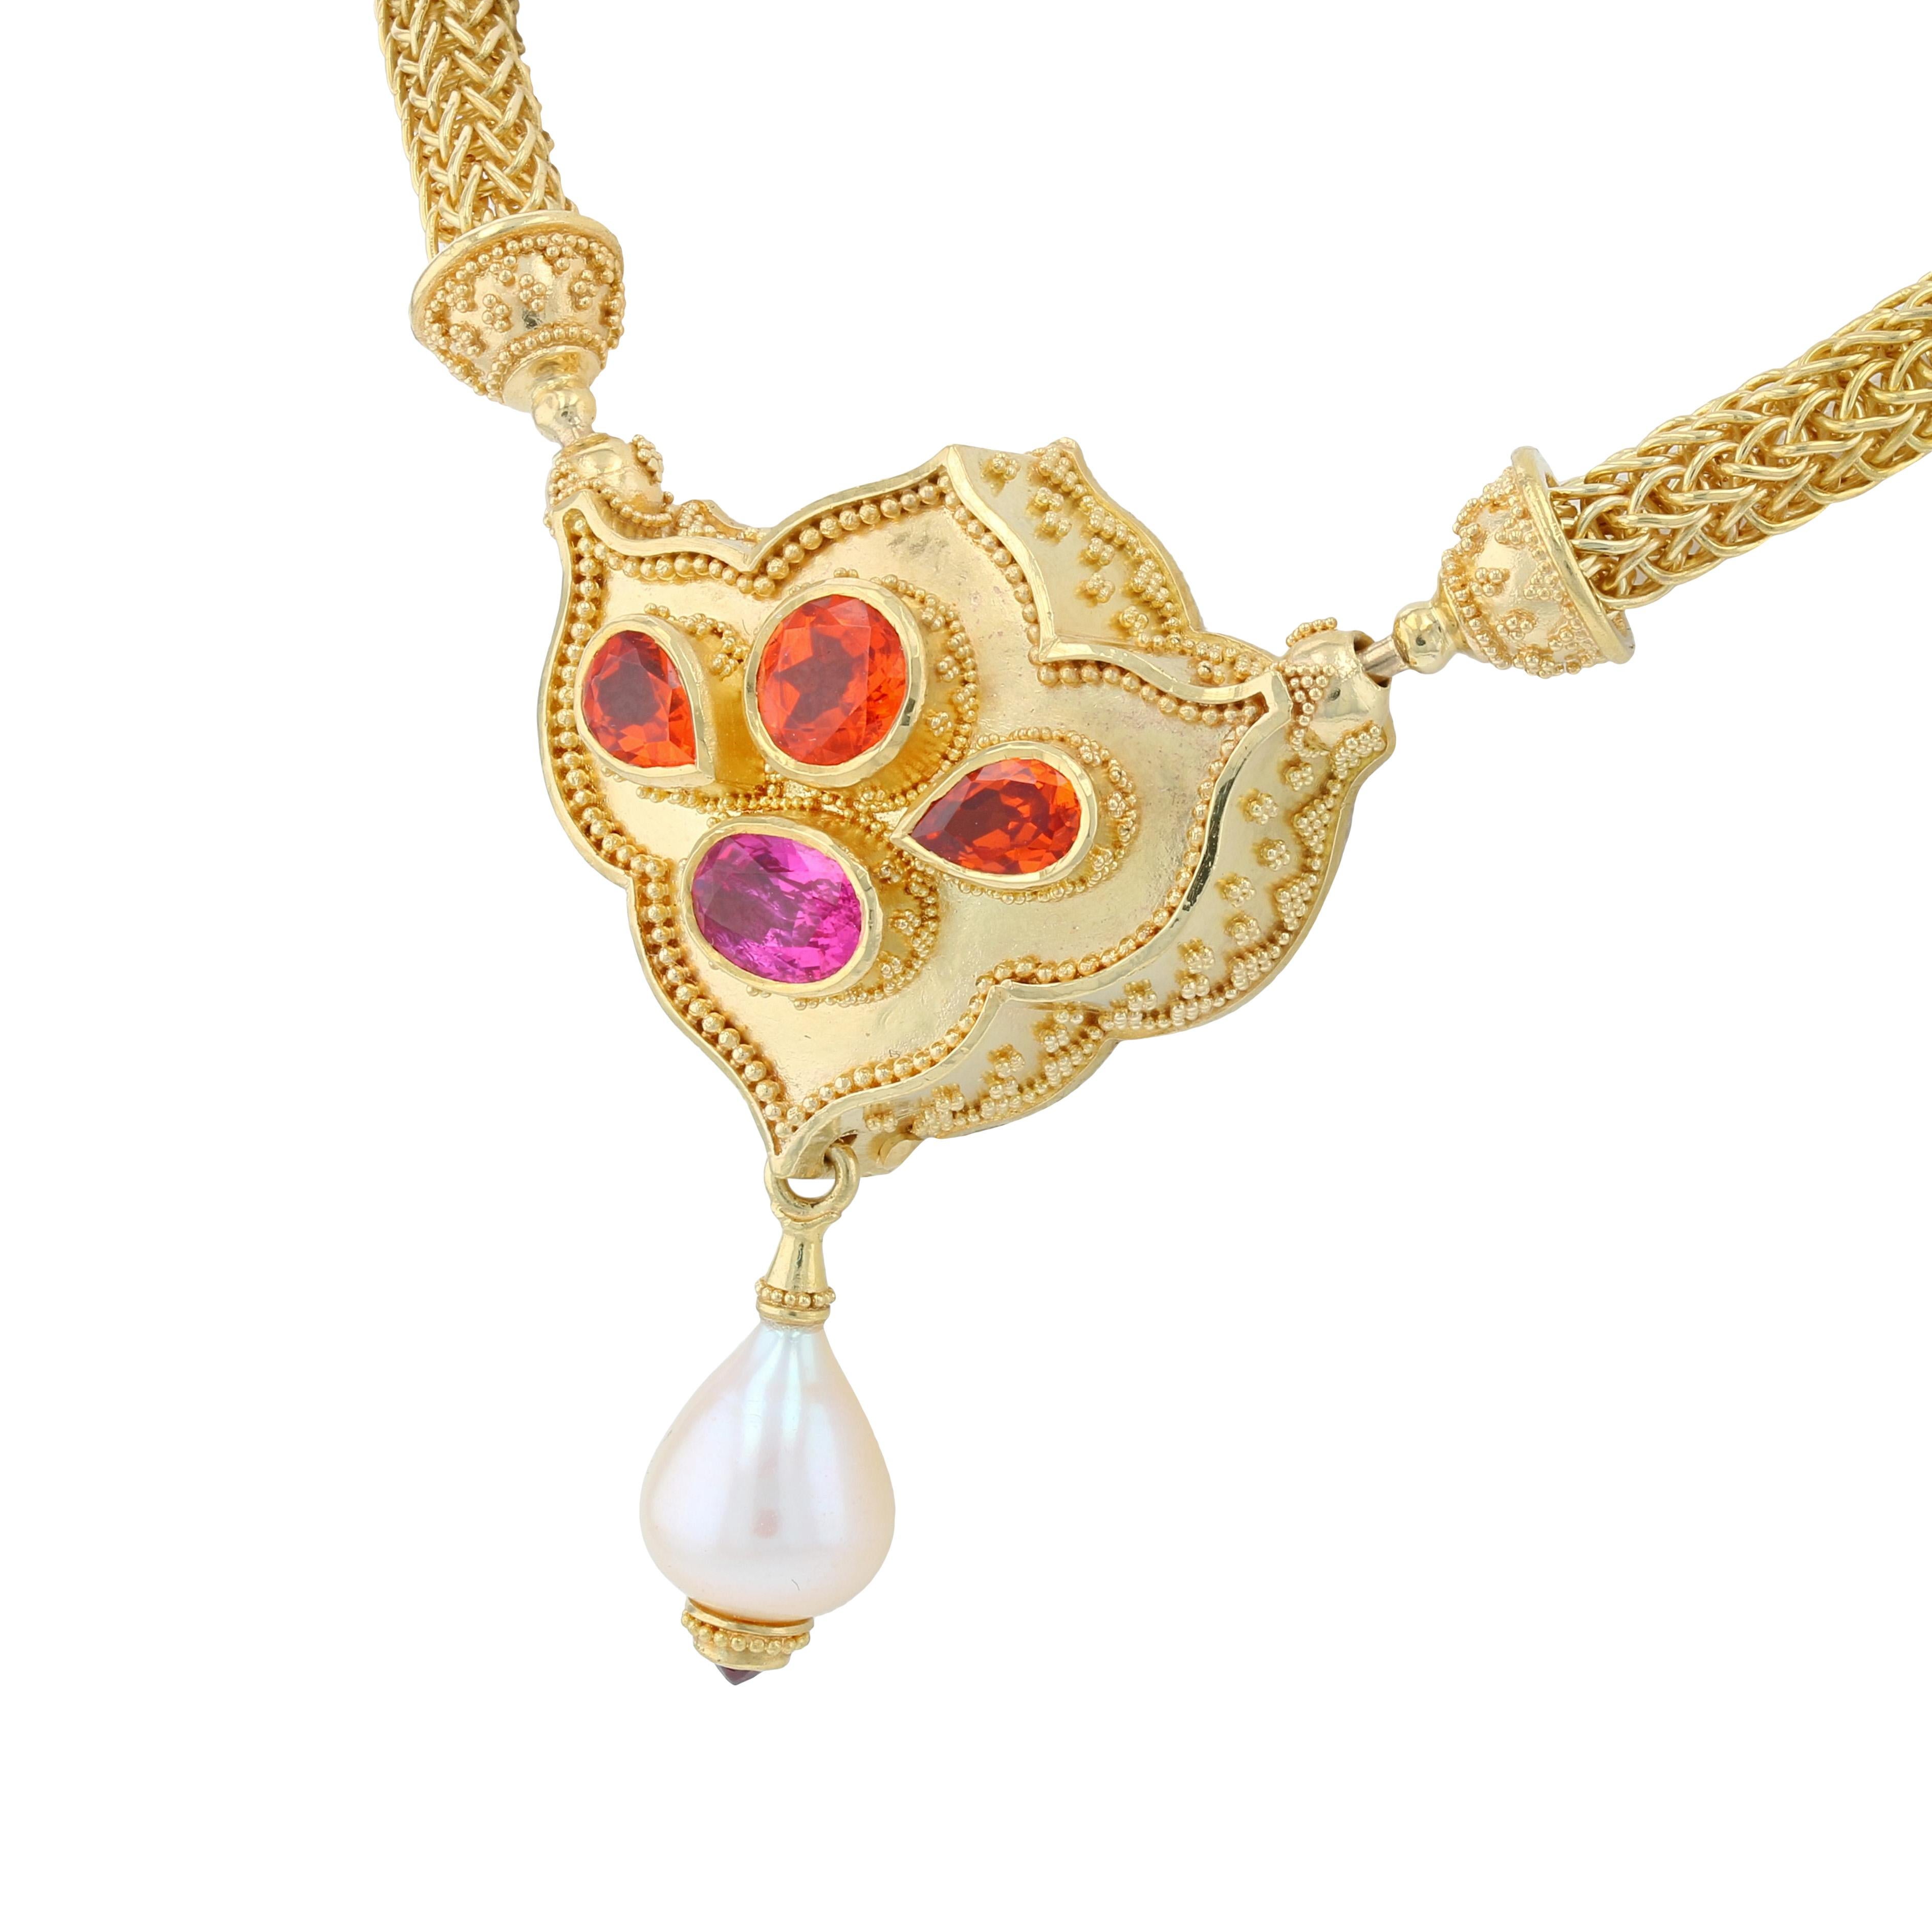 Artisan Kent Raible's Flower Jewel 18K Pendant Necklace with Mandarin Garnets and Spinel For Sale